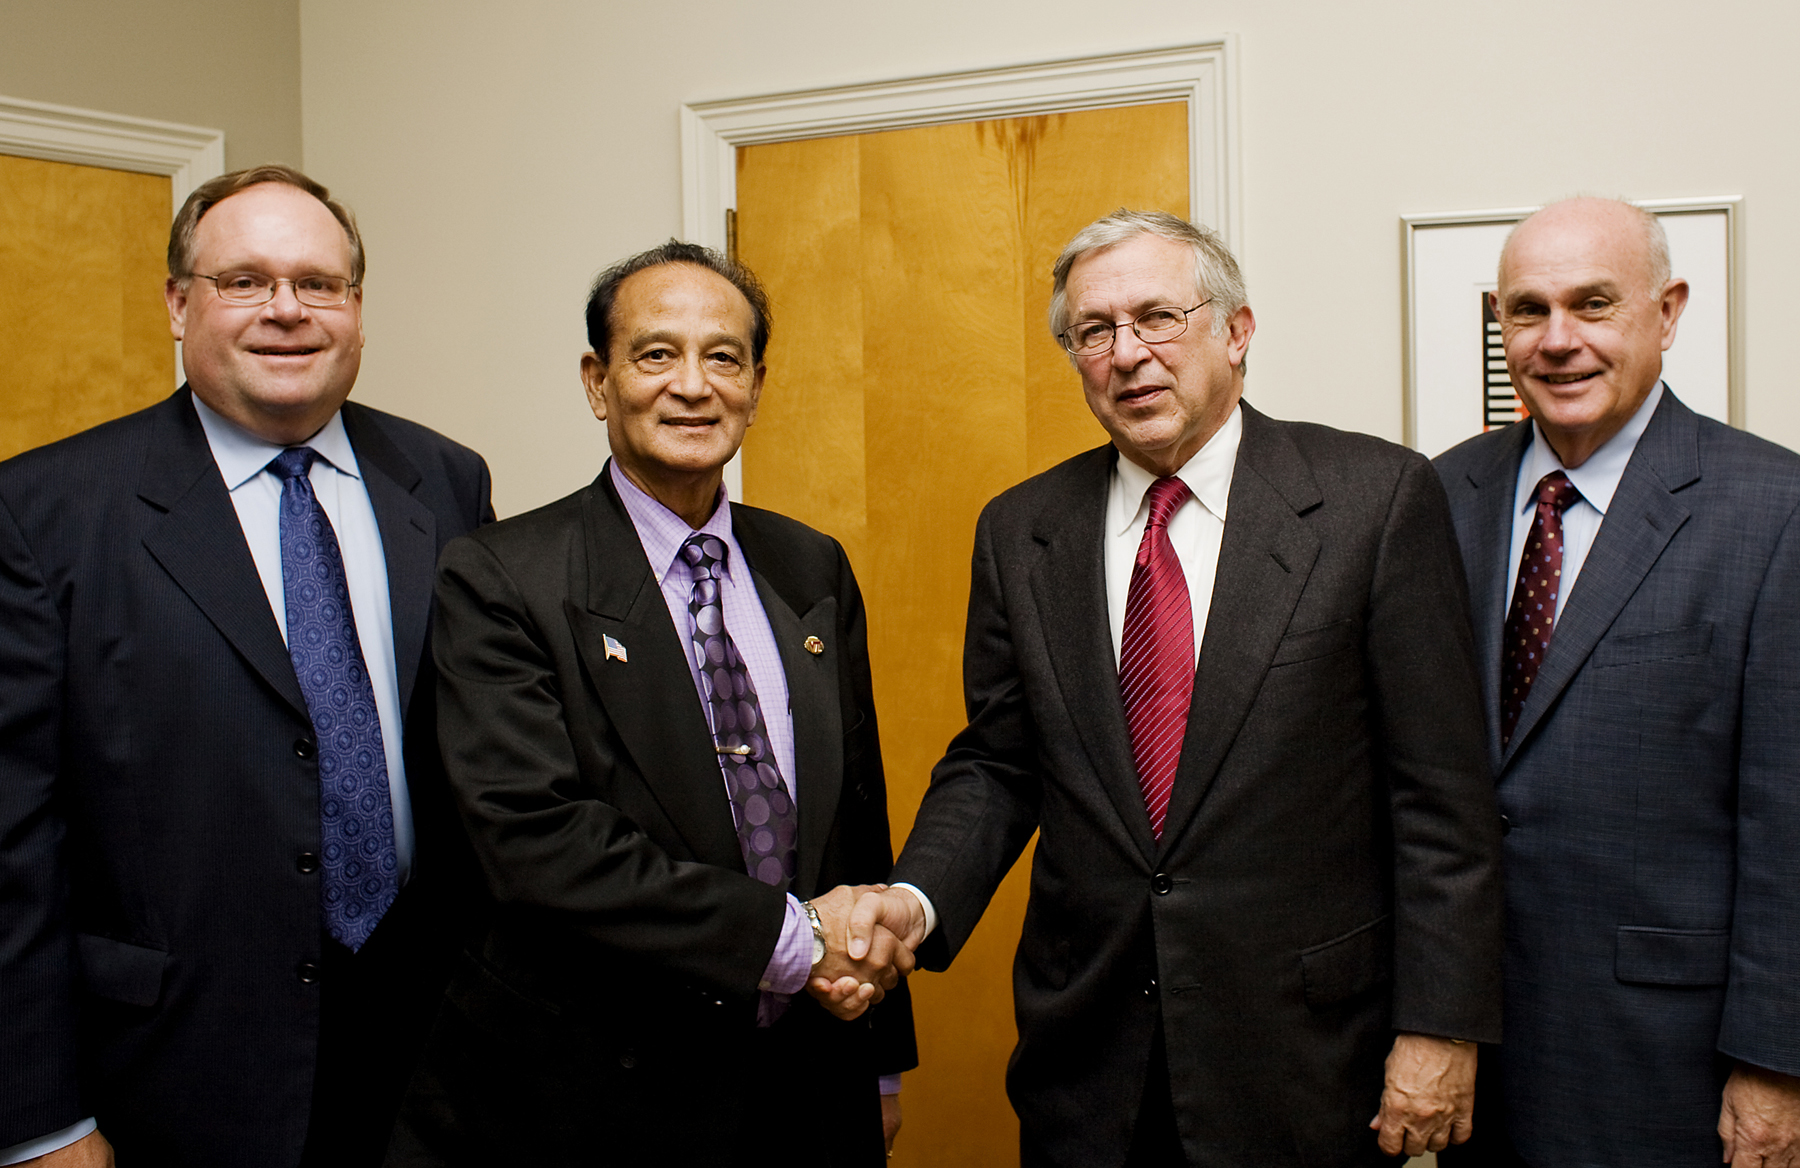 (Left to right) John Dooley, vice president for Outreach and International Affairs; S.K. De Datta, associate vice president for international affairs and director of Virginia Tech's Office of International Research, Education, and Development; Virginia Tech President Charles W. Steger; and Mark McNamee, senior vice president and provost